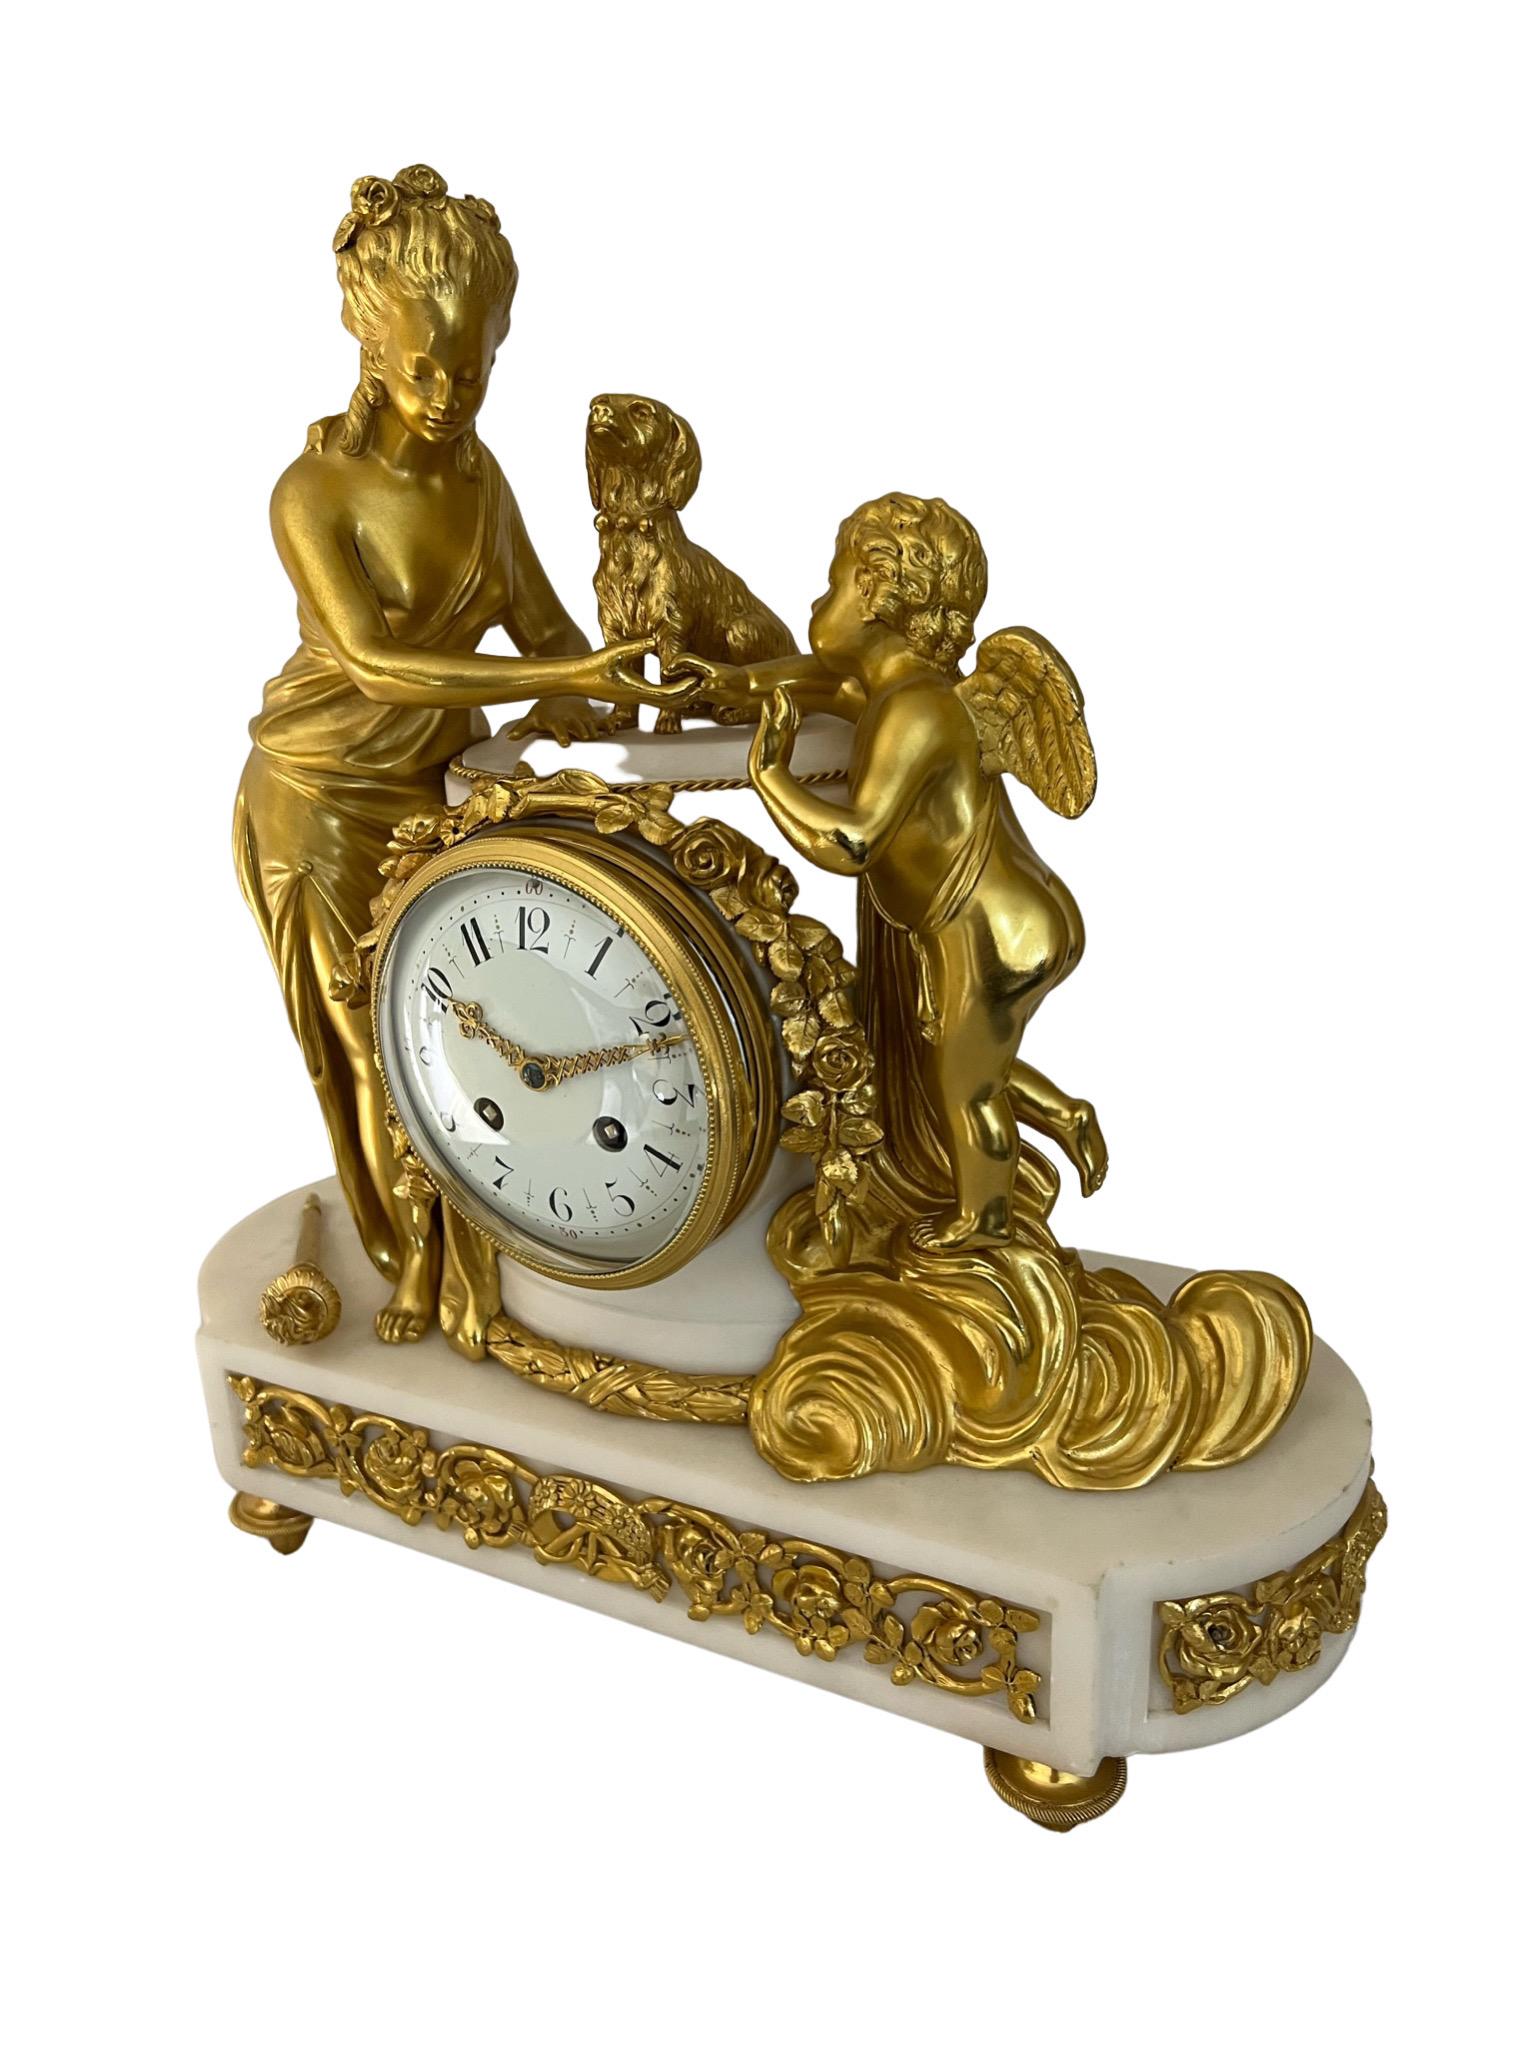 French Louis Xv1 Style Striking Figural Ormolu-Mounted White Marble Clock For Sale 7